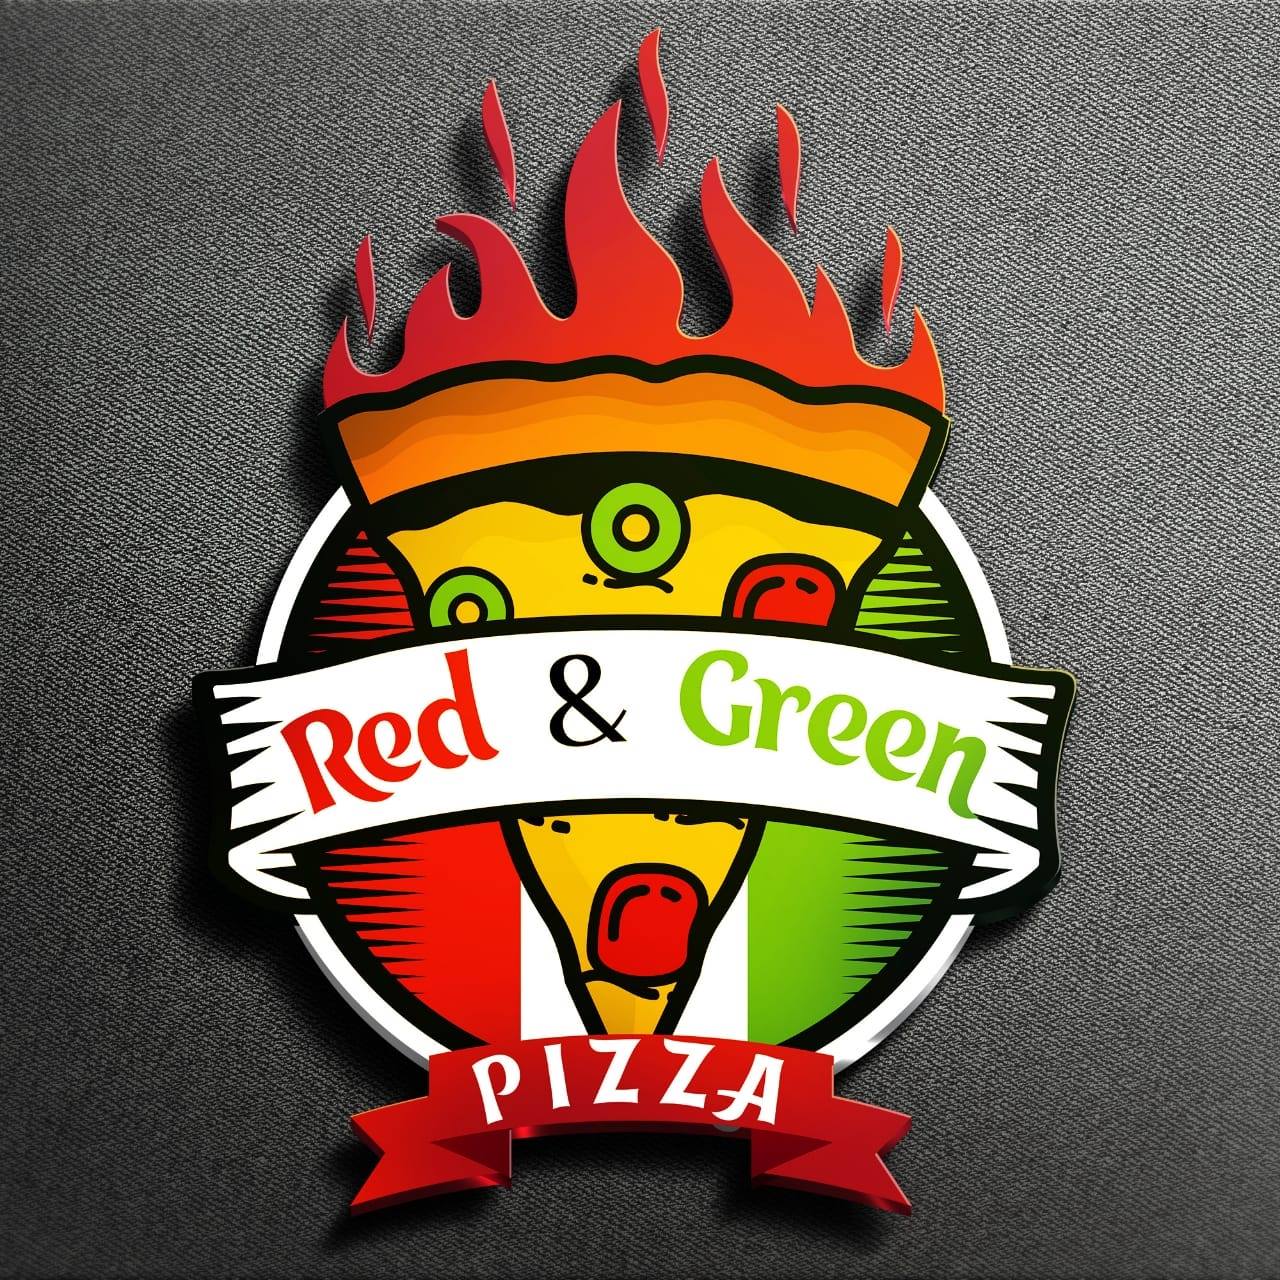 Red & Green Pizza